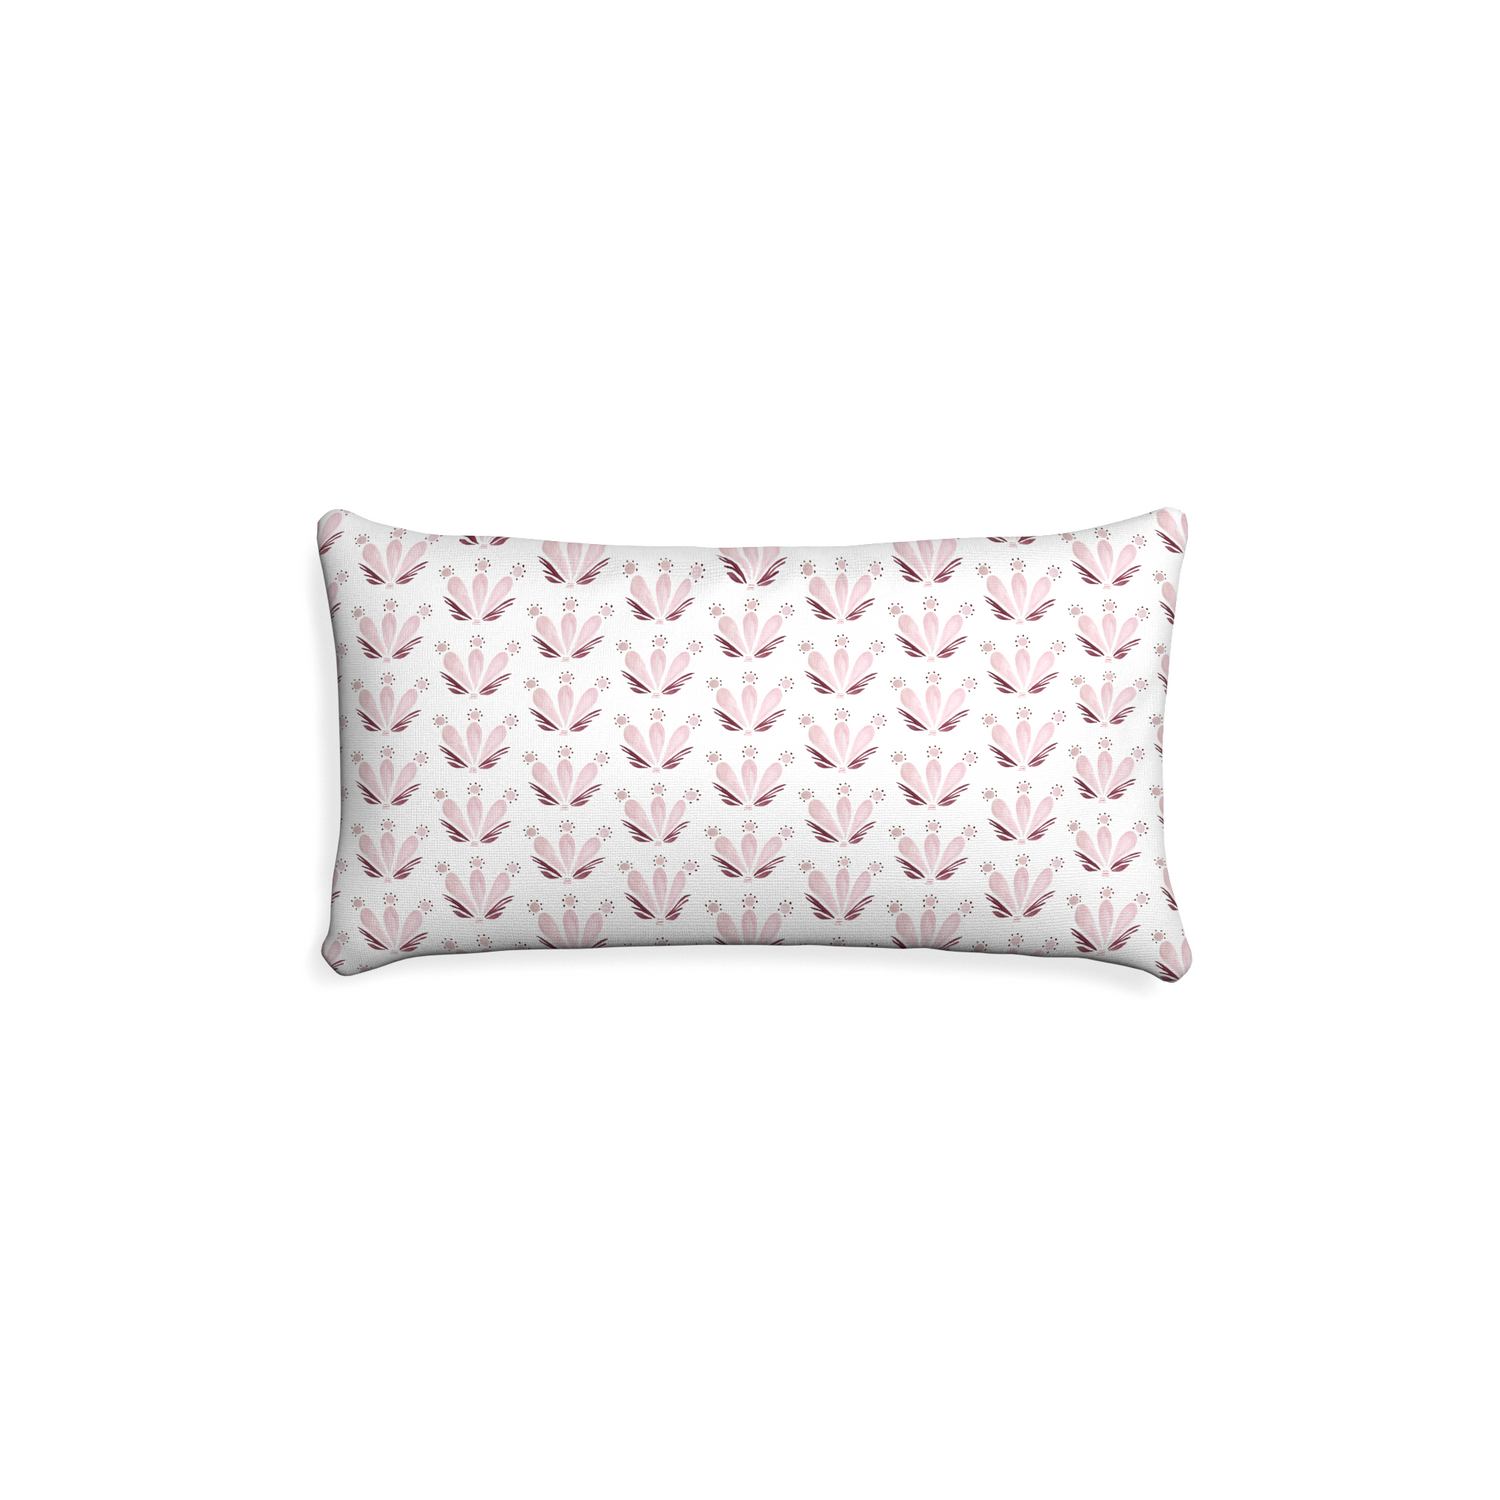 Petite-lumbar serena pink custom pink & burgundy drop repeat floralpillow with none on white background